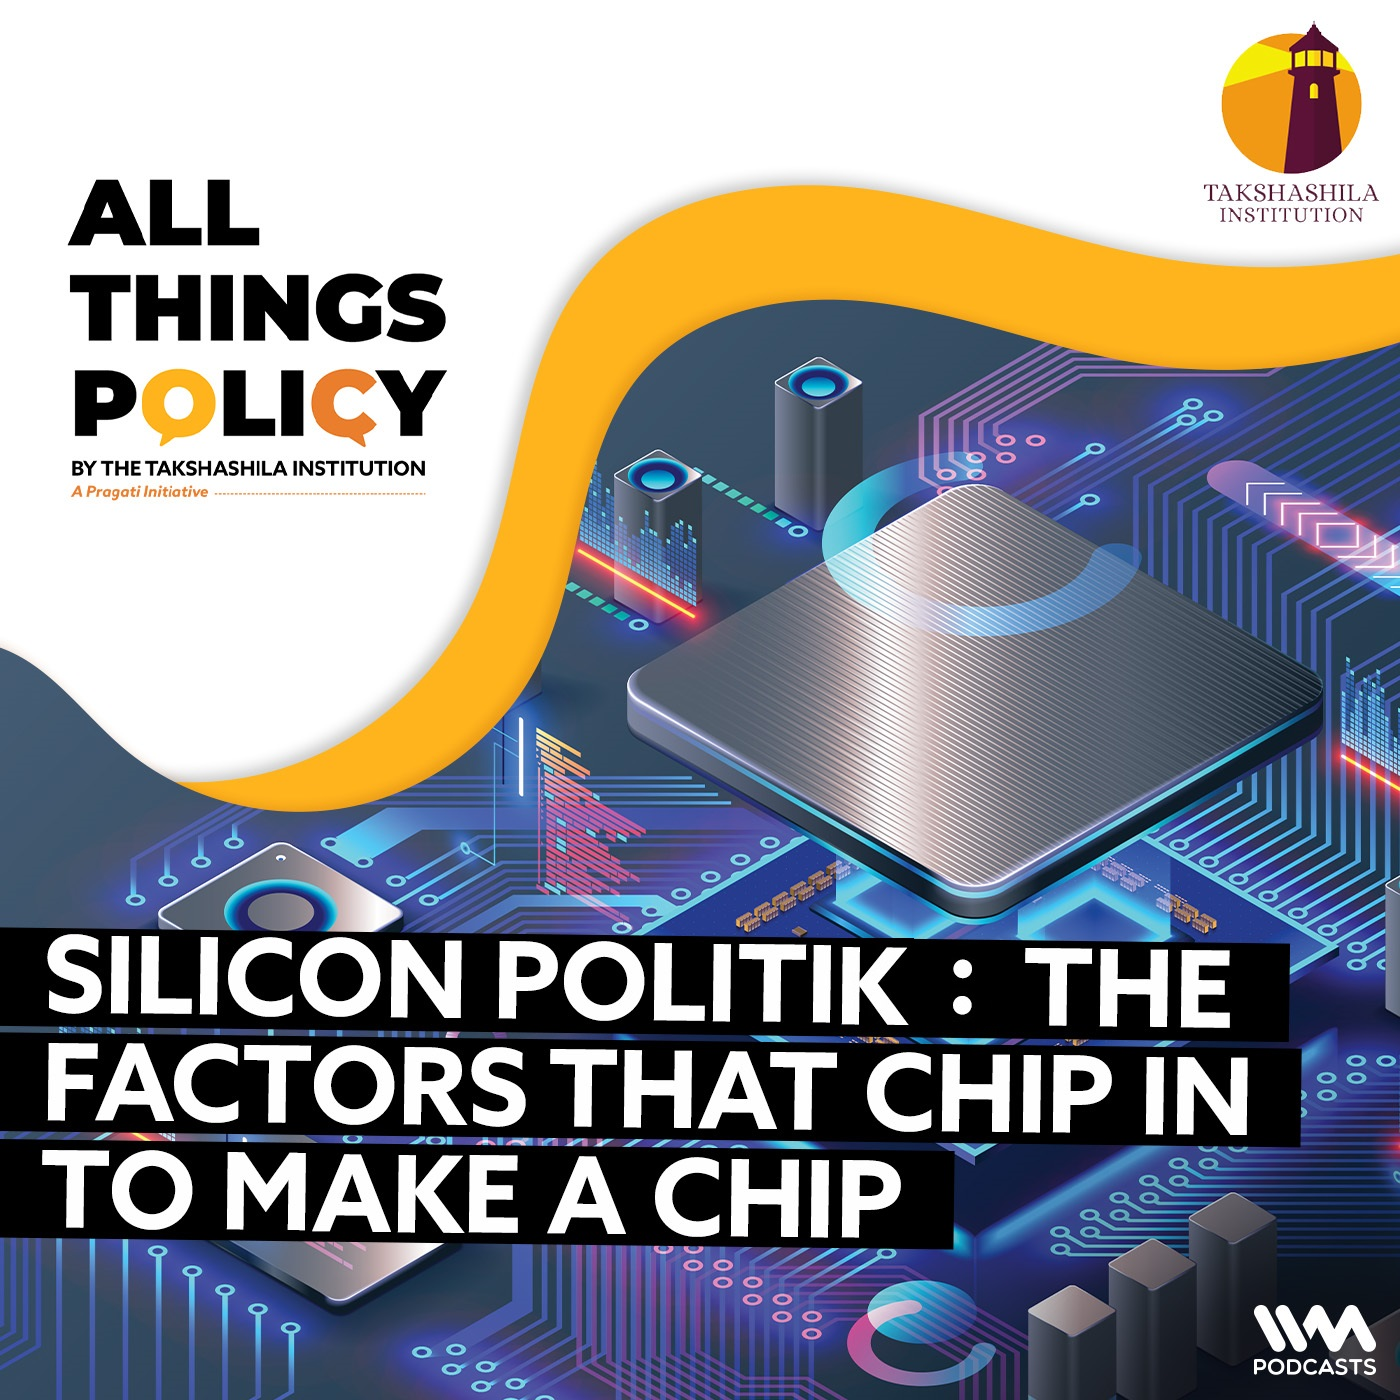 Siliconpolitik : The Factors that Chip in to Make a Chip